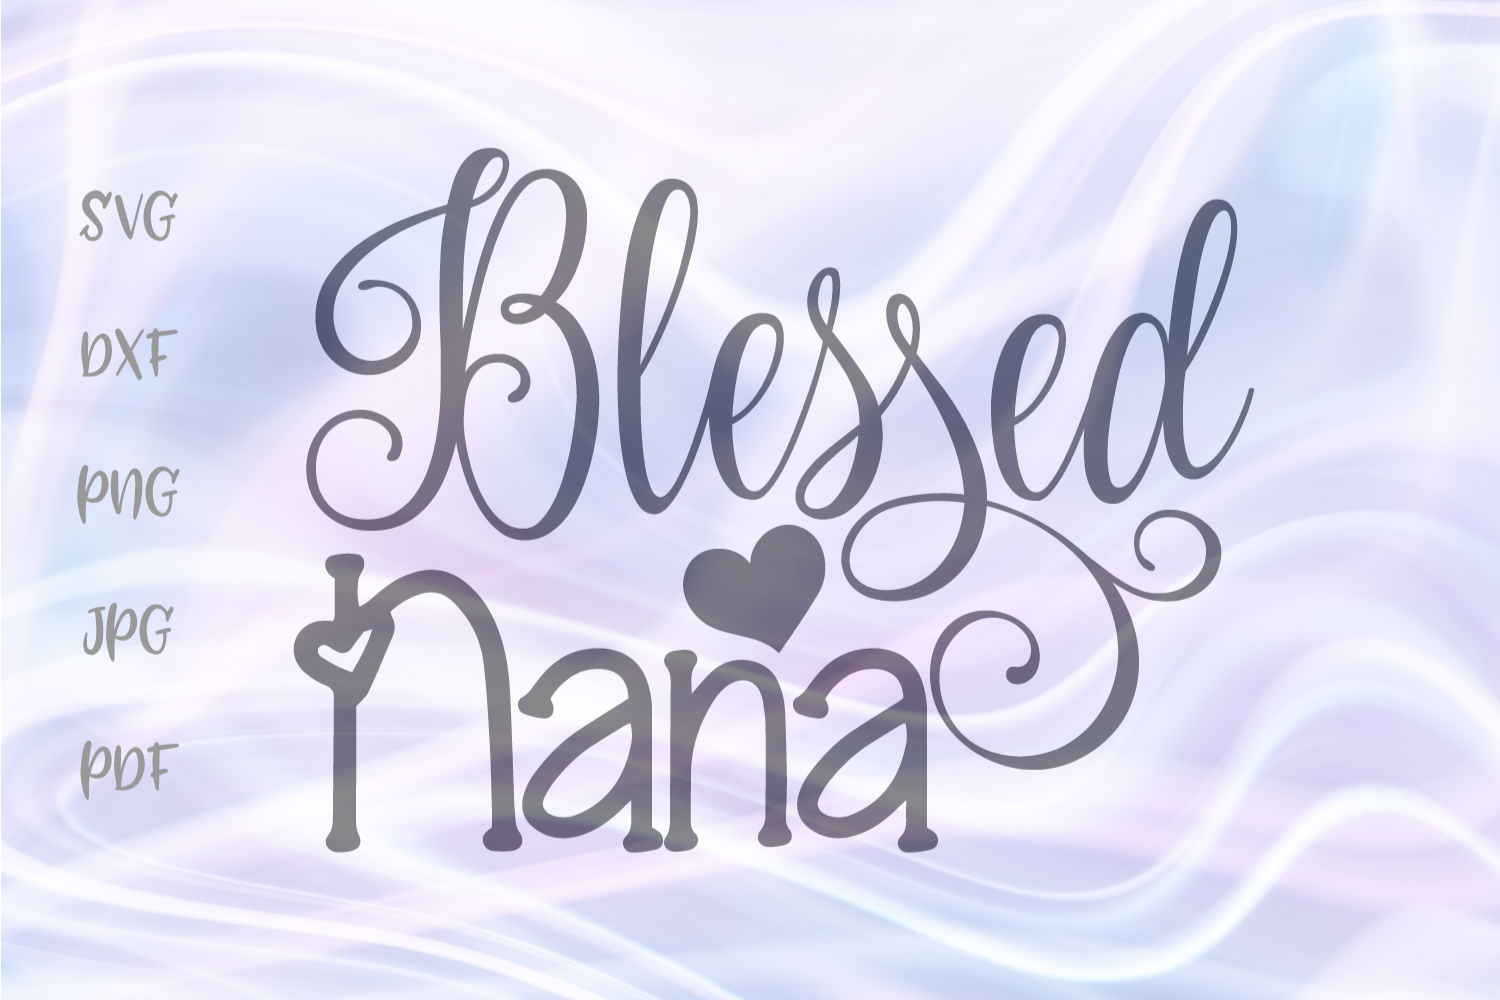 Blessed Nana SVG for Cricut vector Cut File DXF PNG JPG PDF example image 1...